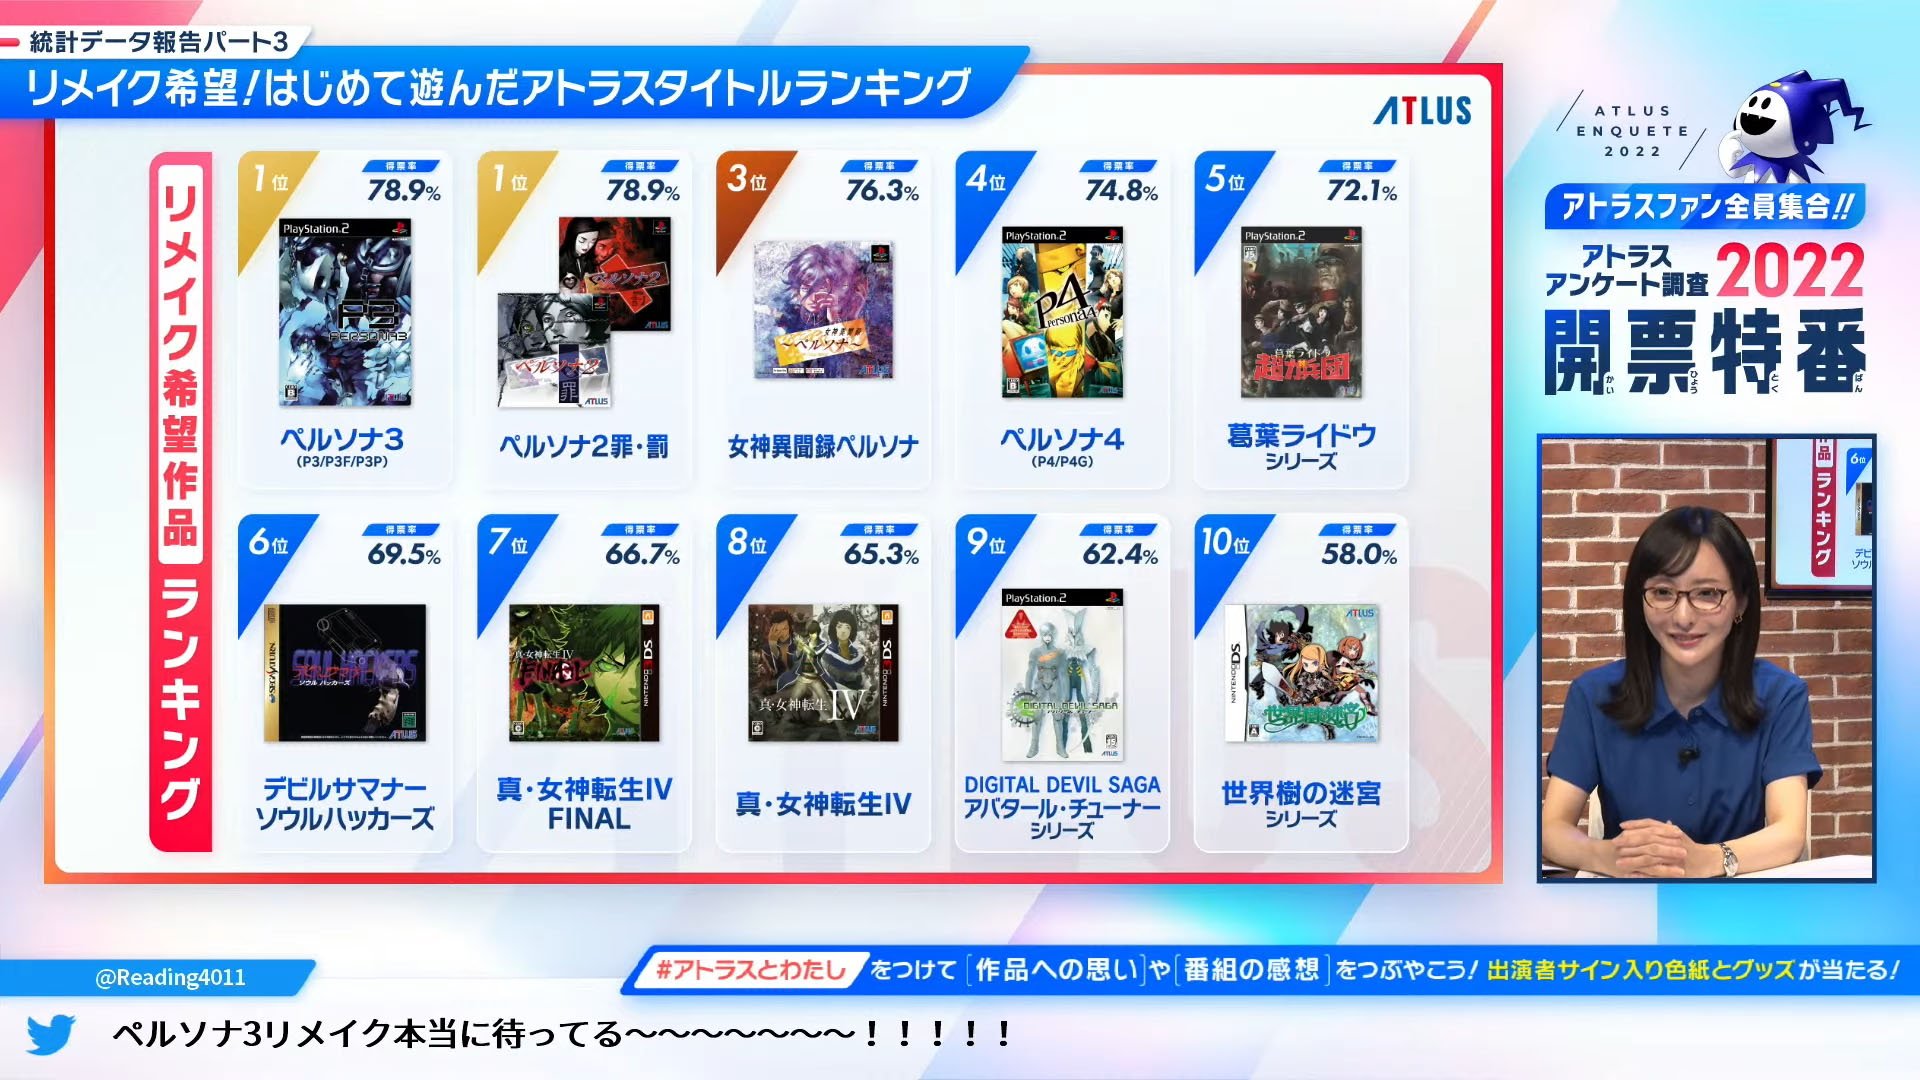 #
      Persona 3 and Persona 2 are ATLUS fans’ most wanted remakes, according to 2022 survey results